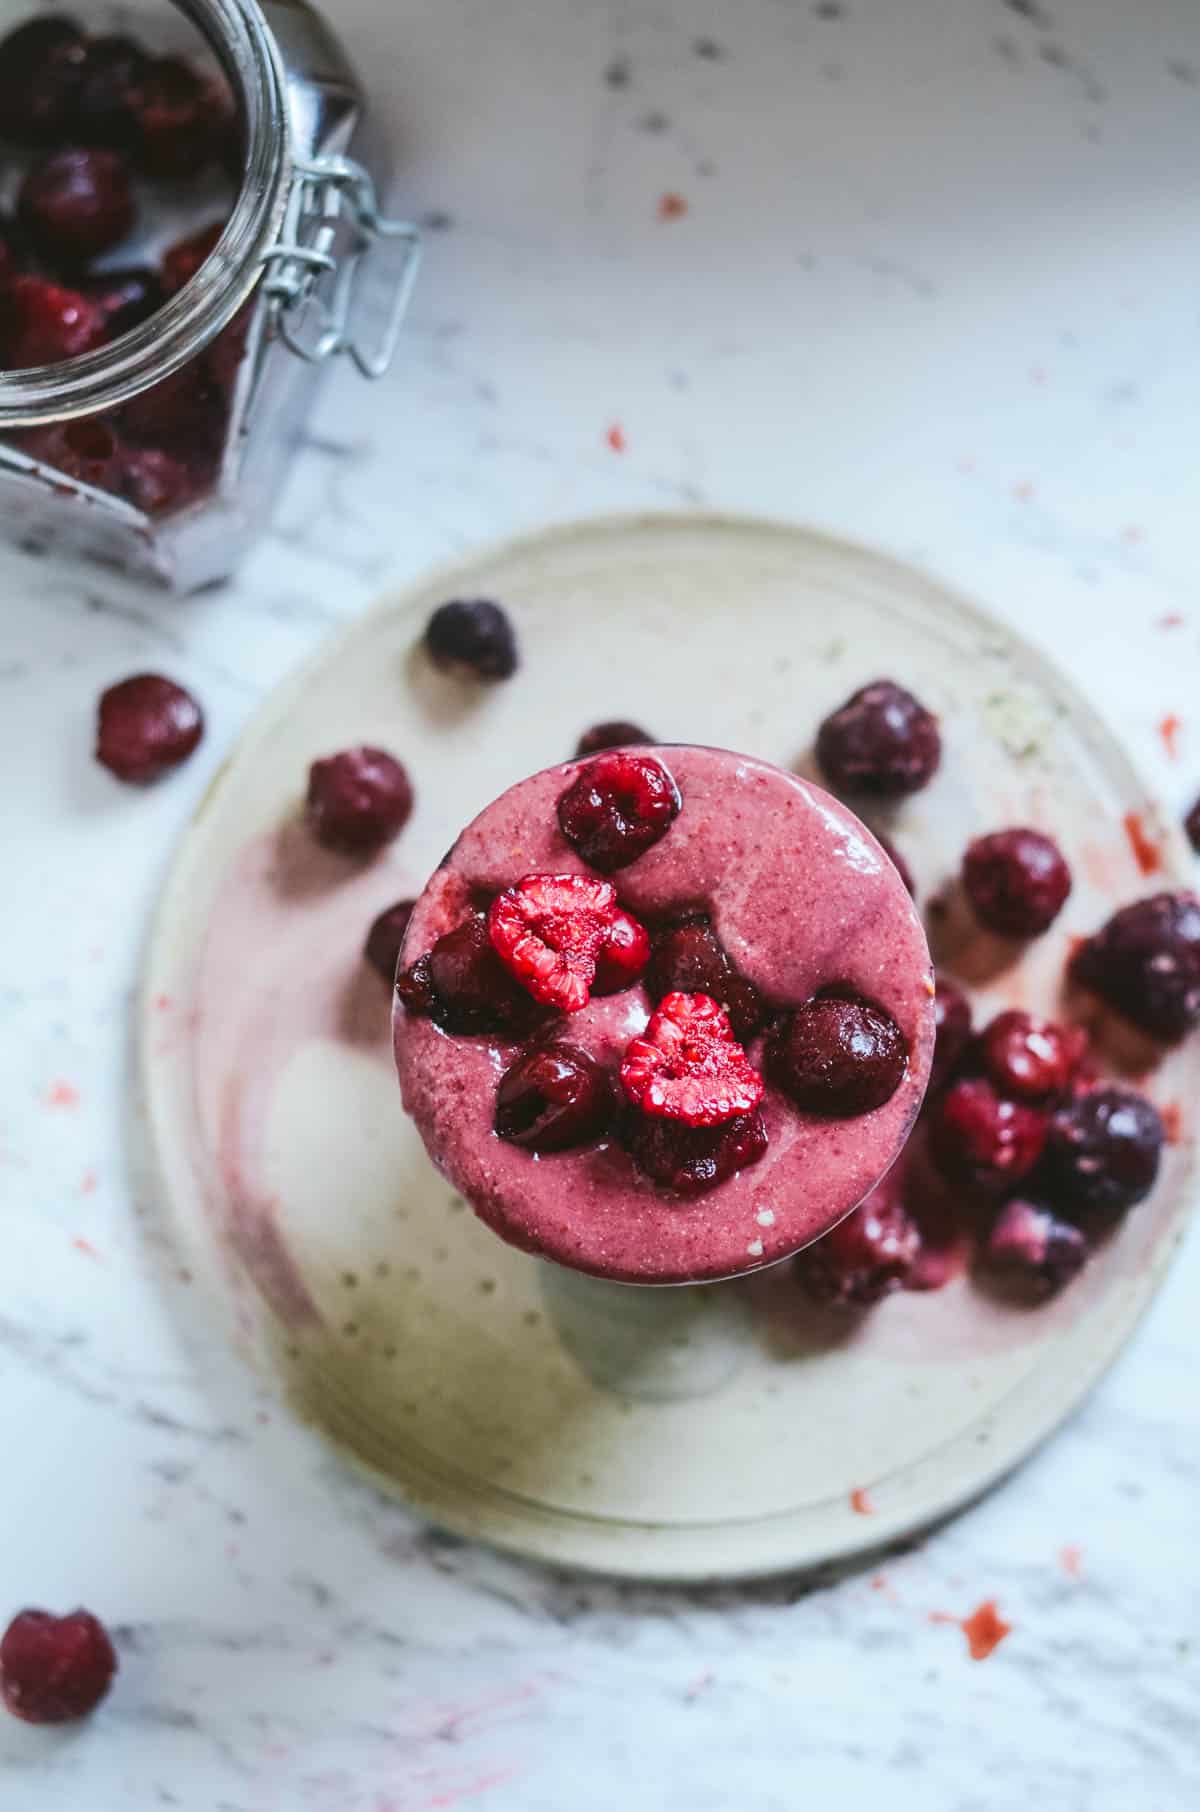 A dark red smoothie in a glass with frozen raspberries and cherries on top.